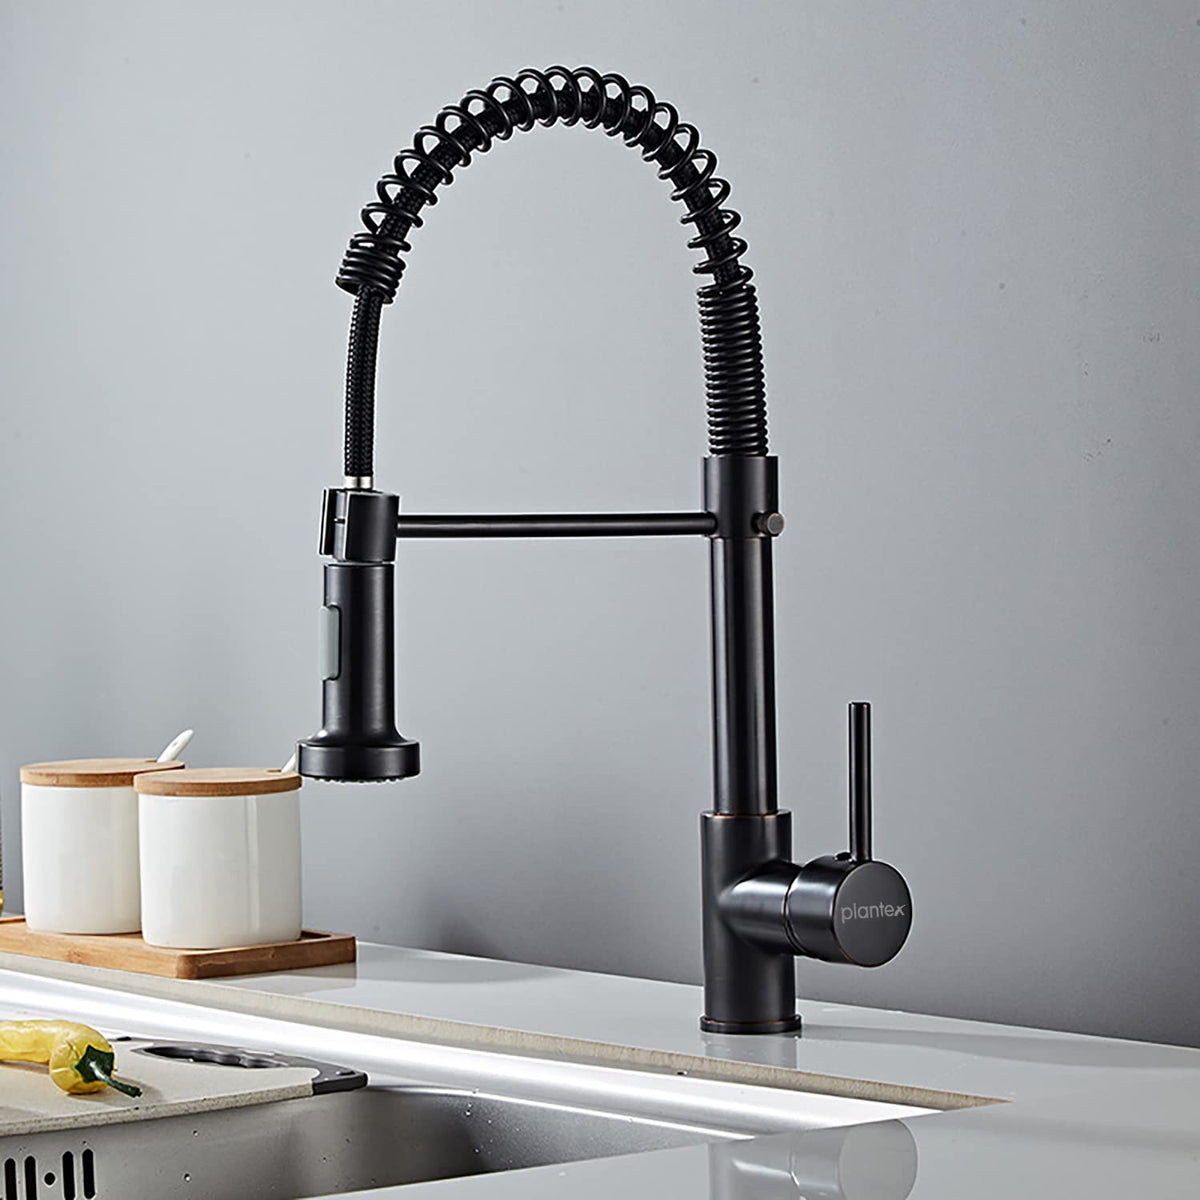 Plantex Designer Brass Single Handle High Arc Spring Pull Out Kitchen Sink Faucet/Hot & Cold Water Mixer Tap with Pull Down Sprayer Multitask Mode- Matte Black